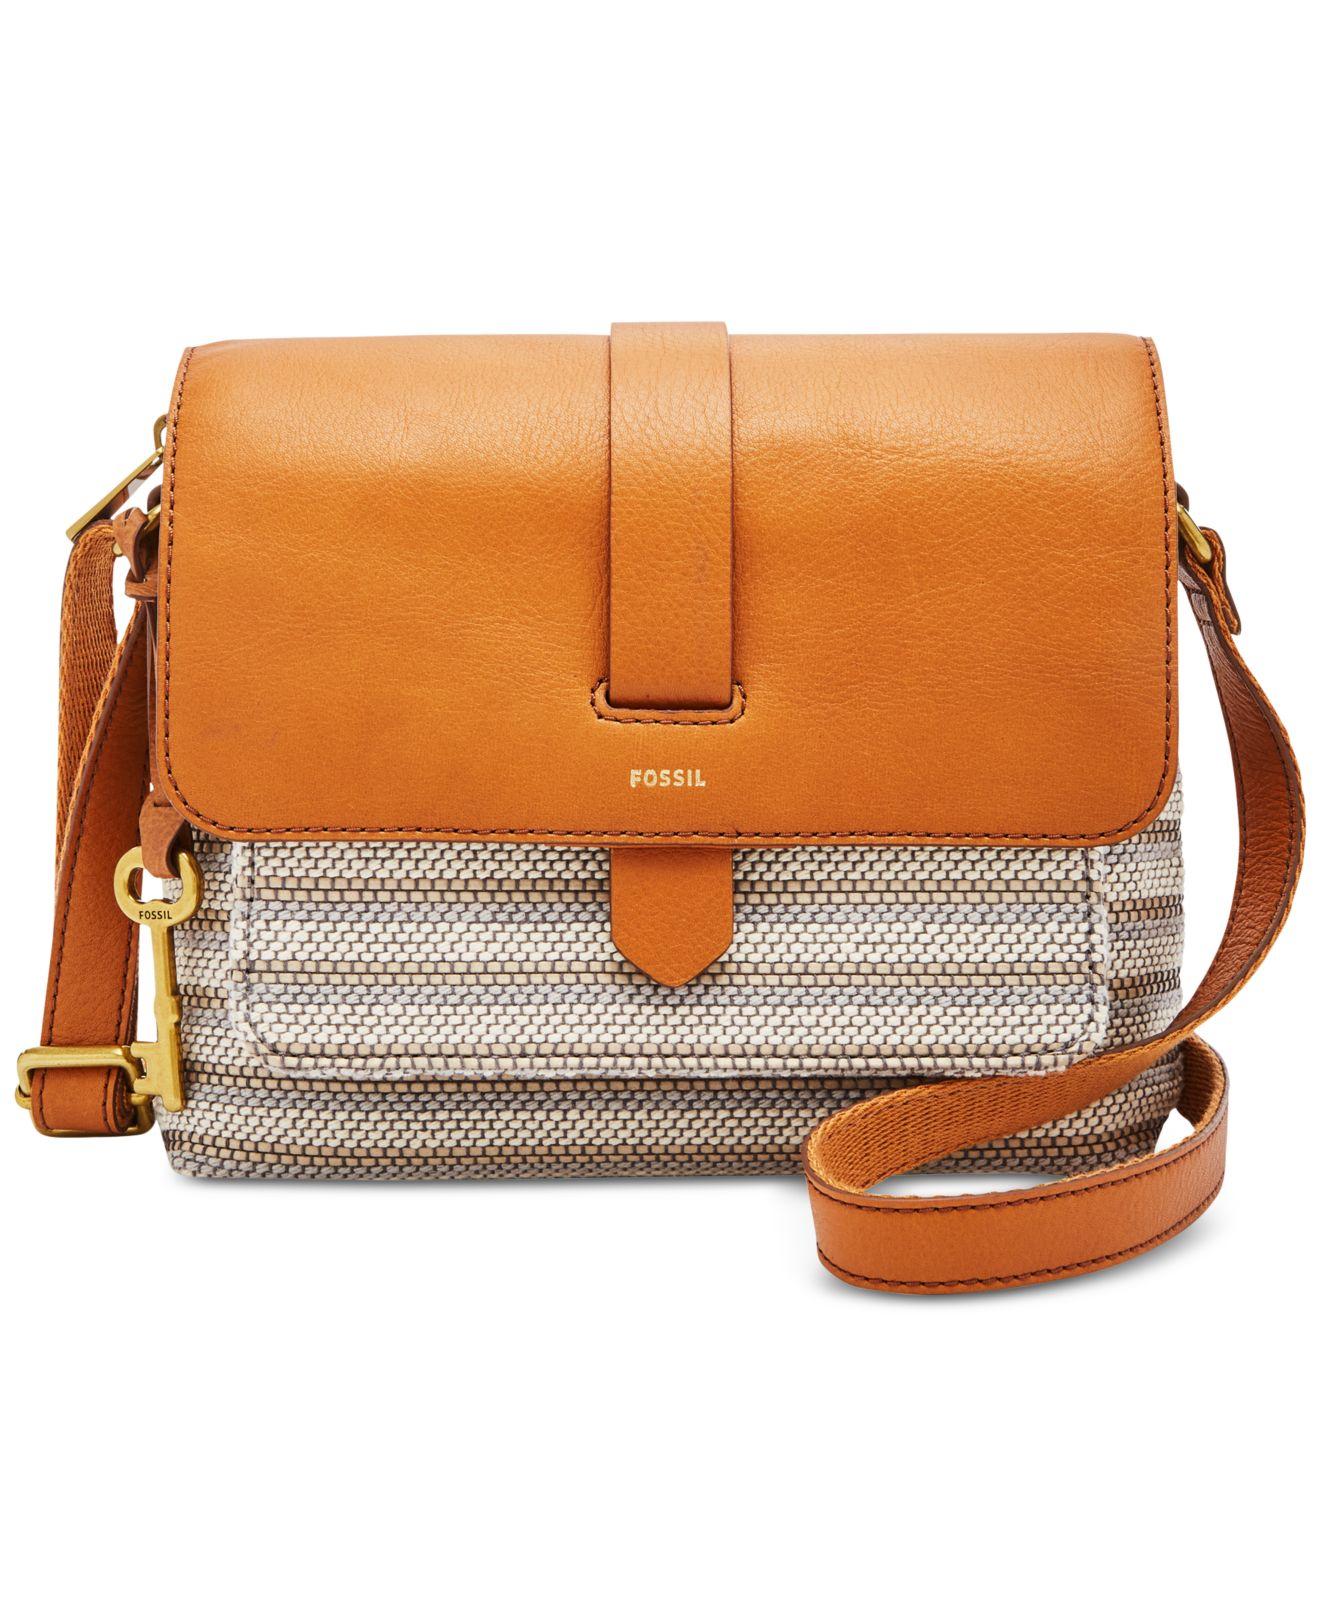 Lyst - Fossil Kinley Small Zip Top Cross-body Bag - Save 8%